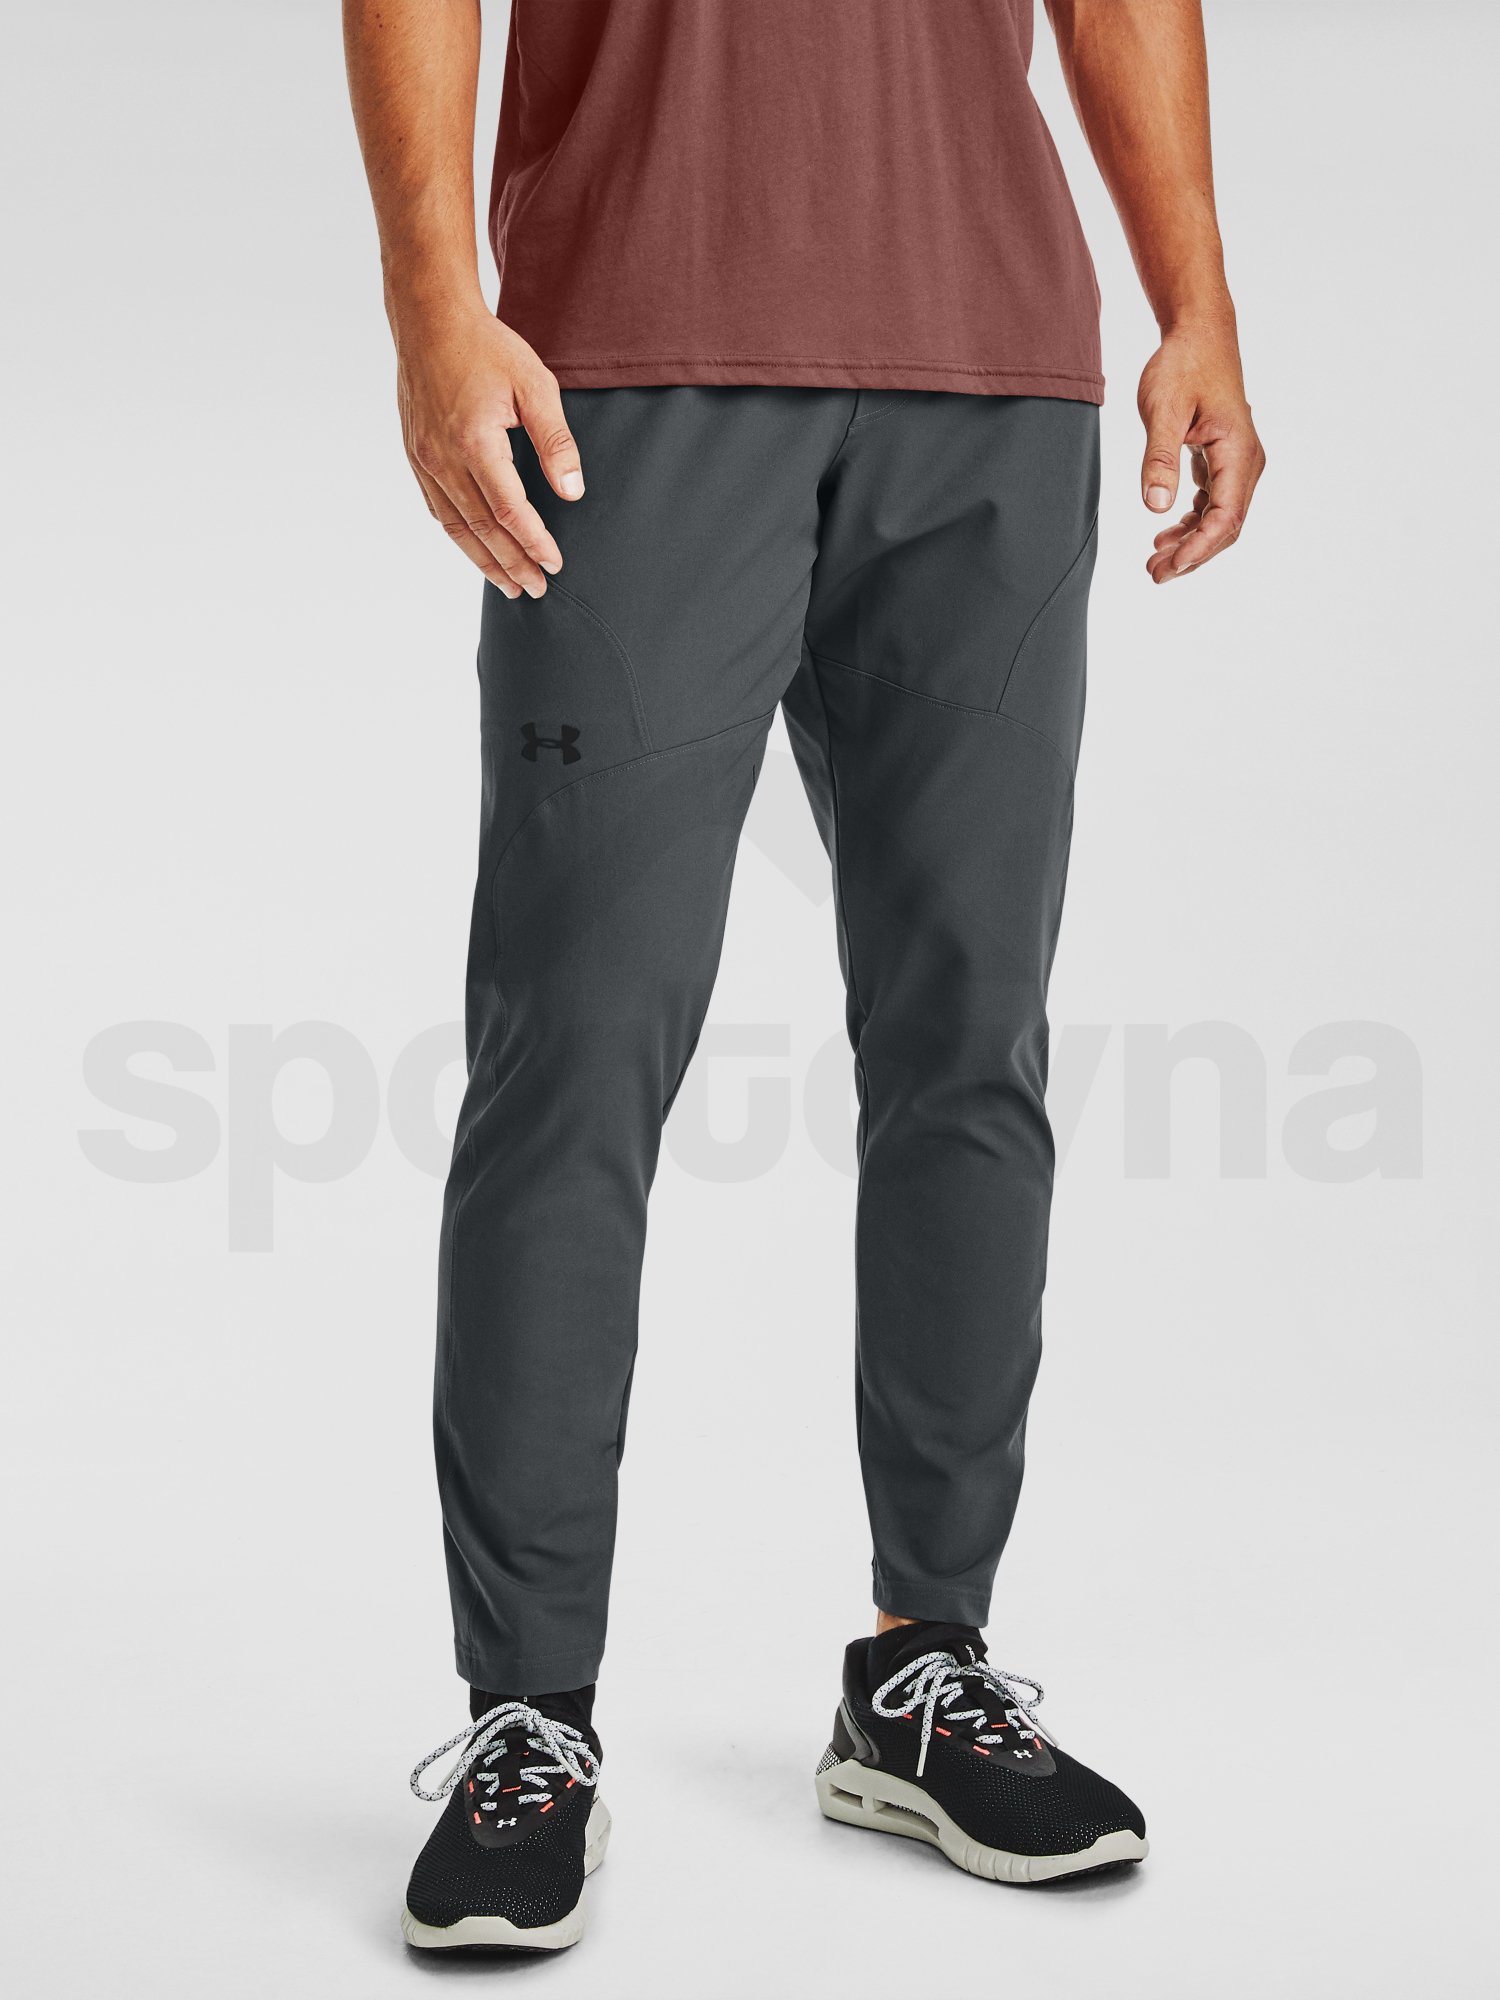 Kalhoty Under Armour UNSTOPPABLE TAPERED Storm PANTS-GRY